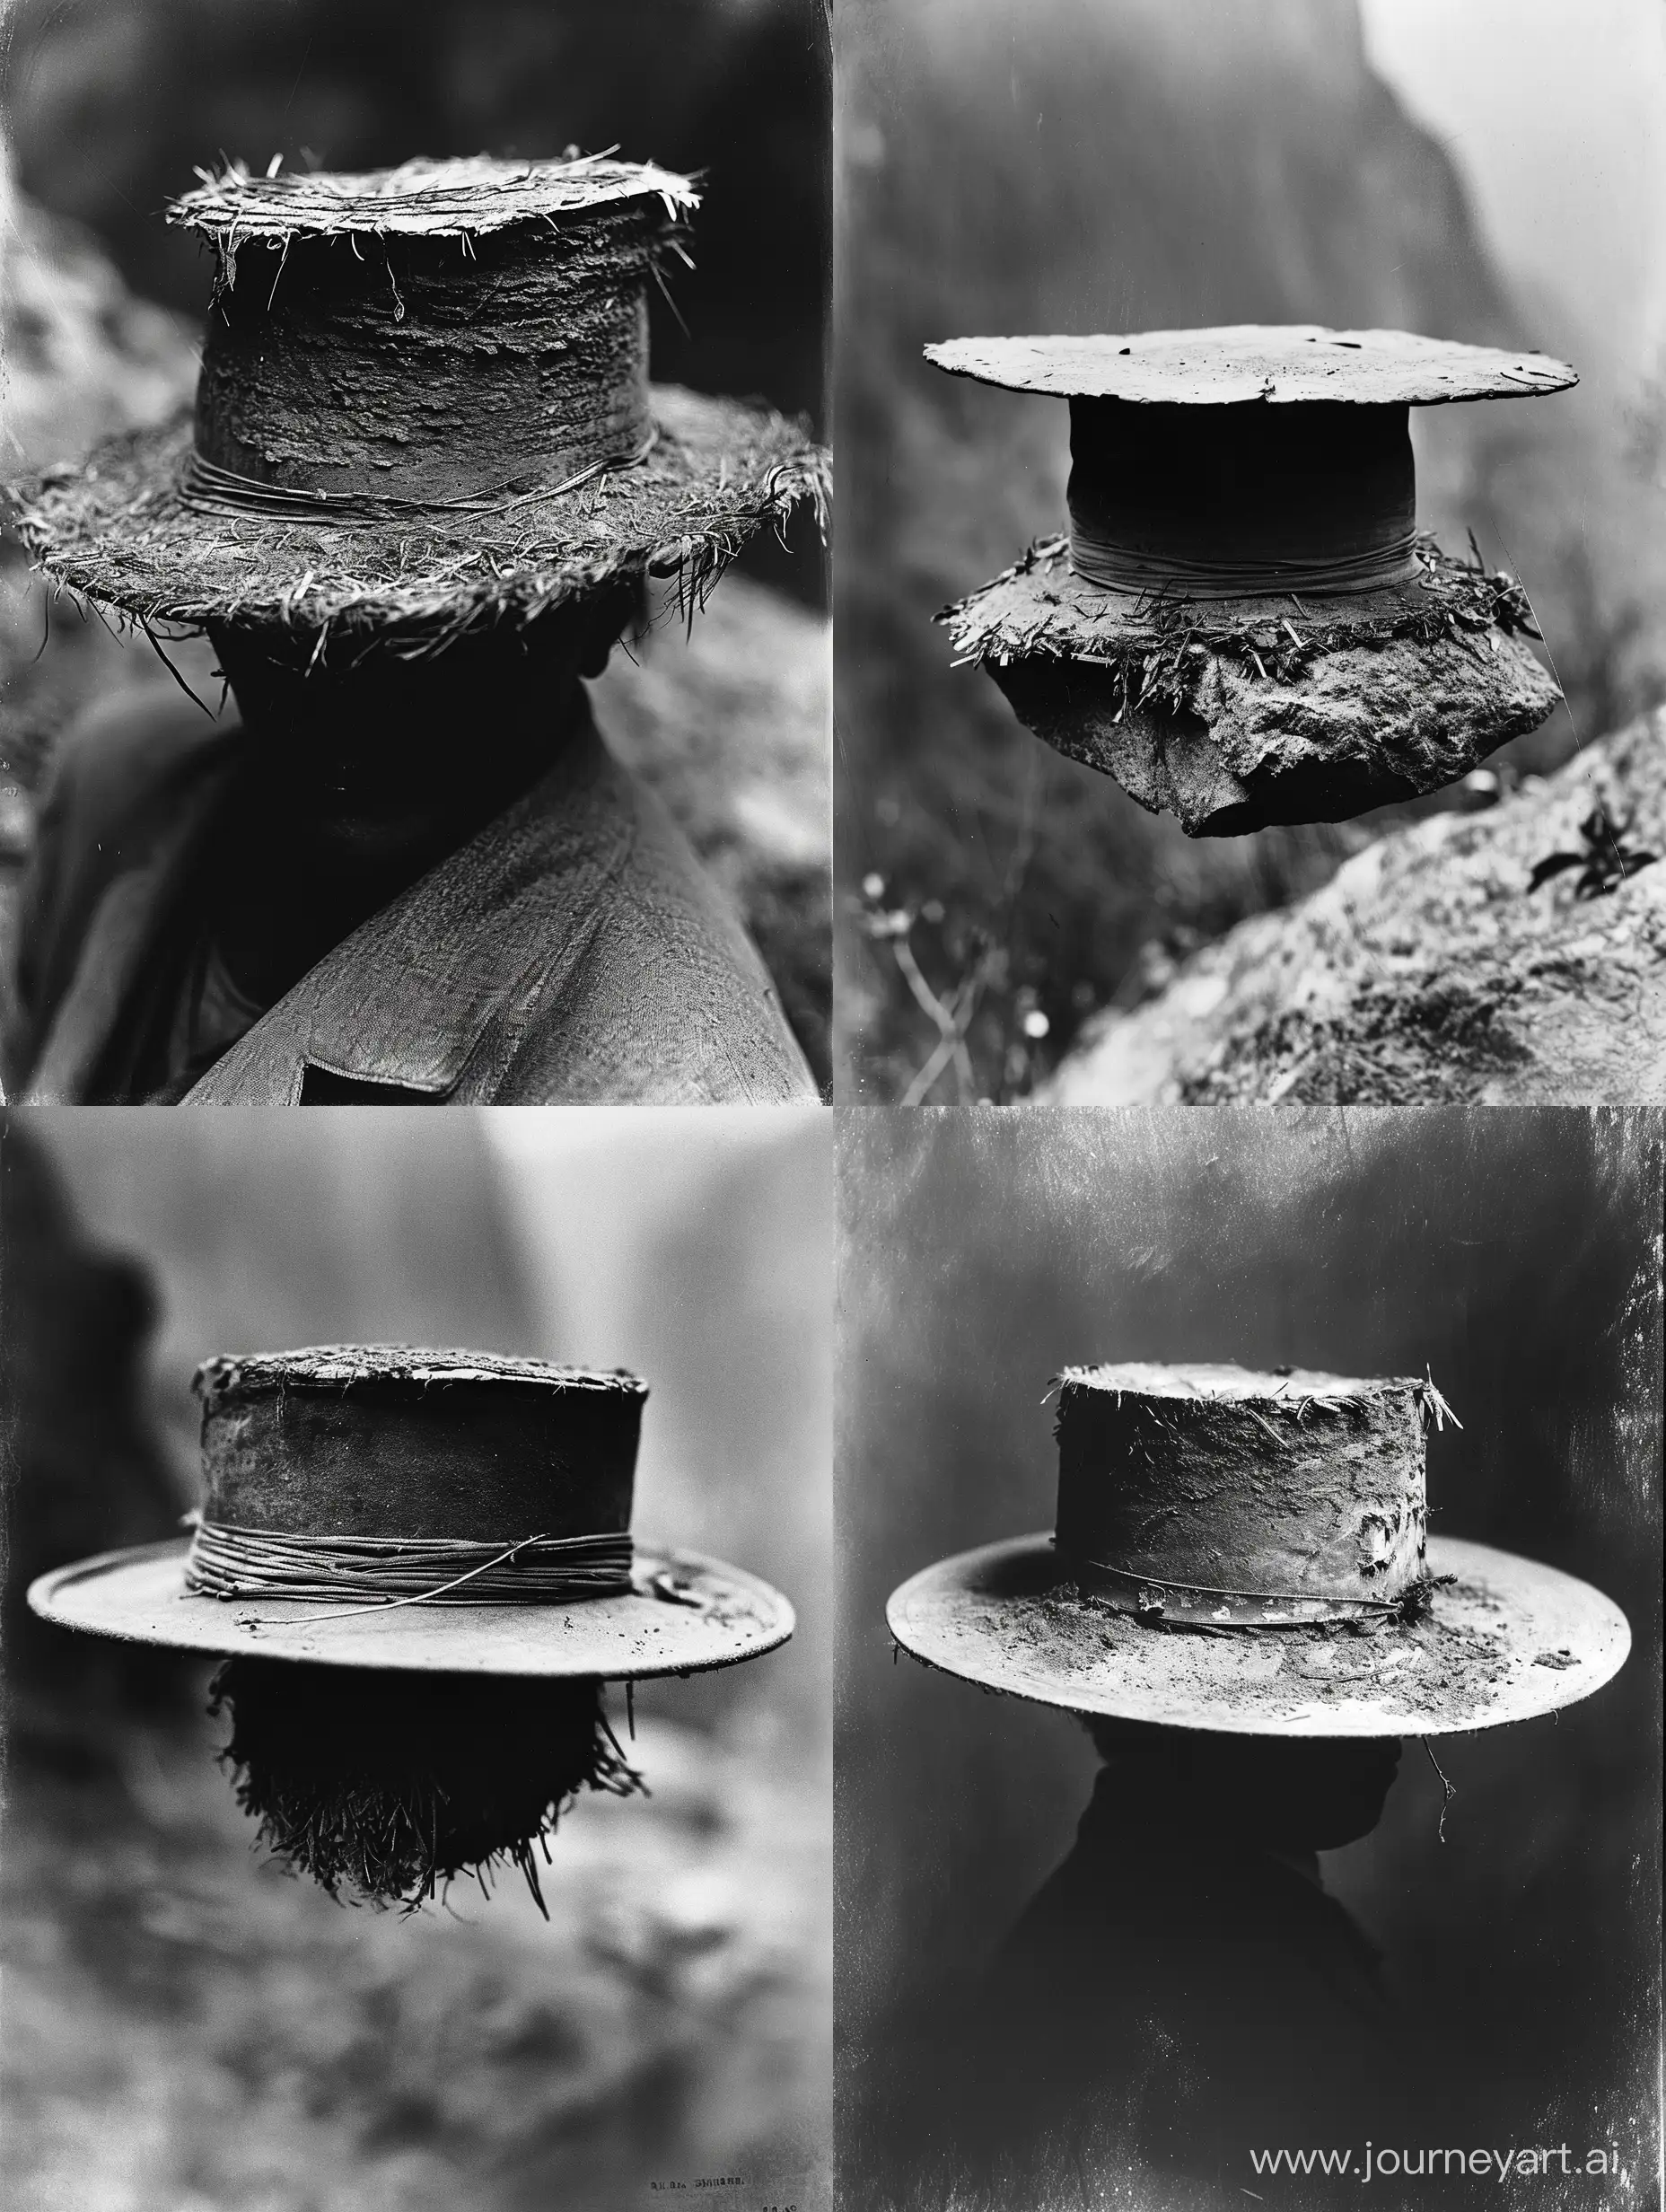 Chinese-Immigrant-Workers-WornOut-Hat-in-Yosemite-Late-1800s